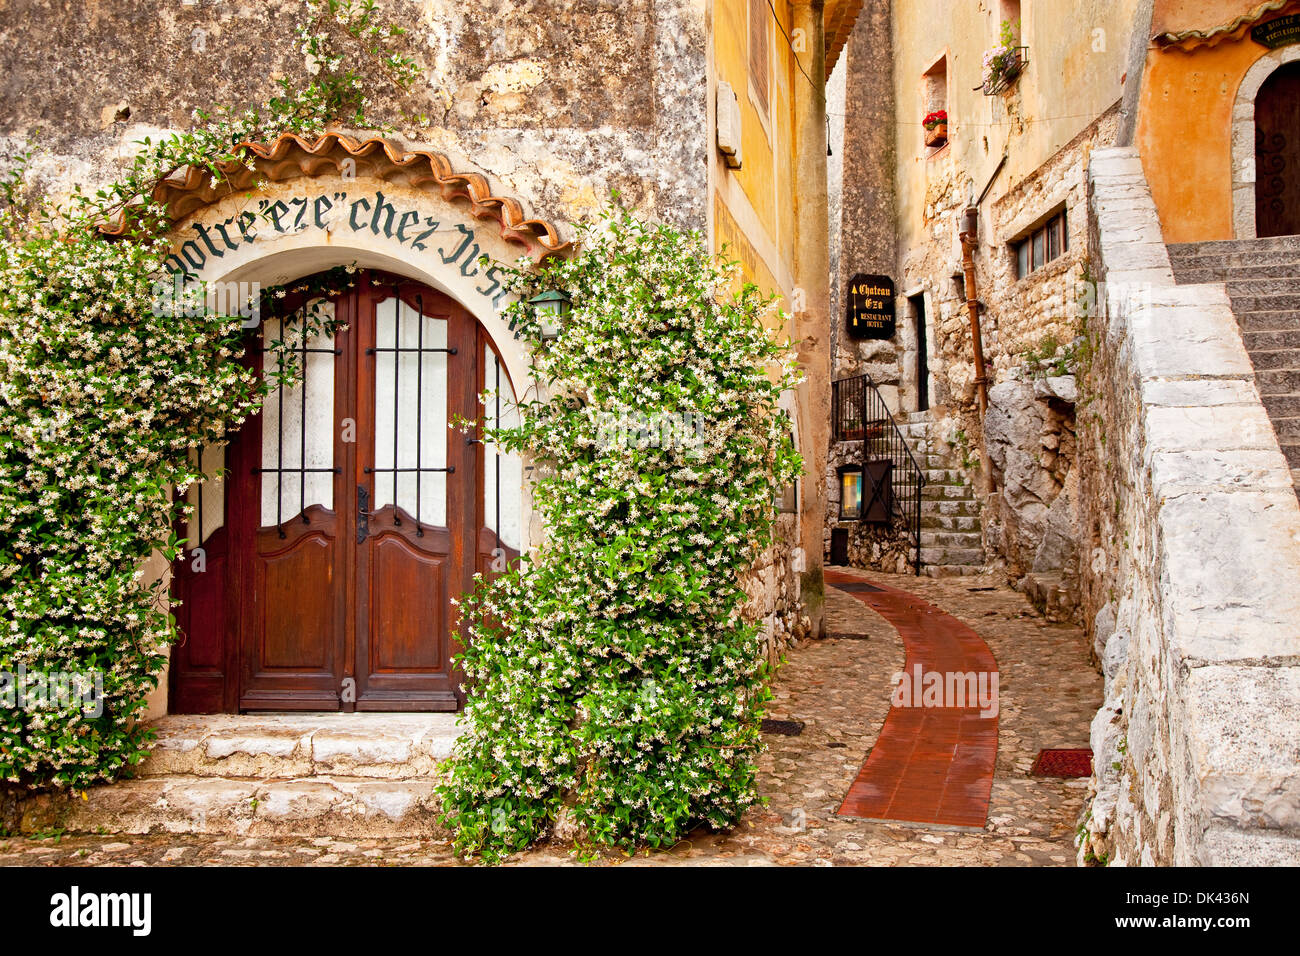 Jasmine covered entryway to shop in ancient town of Eze, Provence France Stock Photo